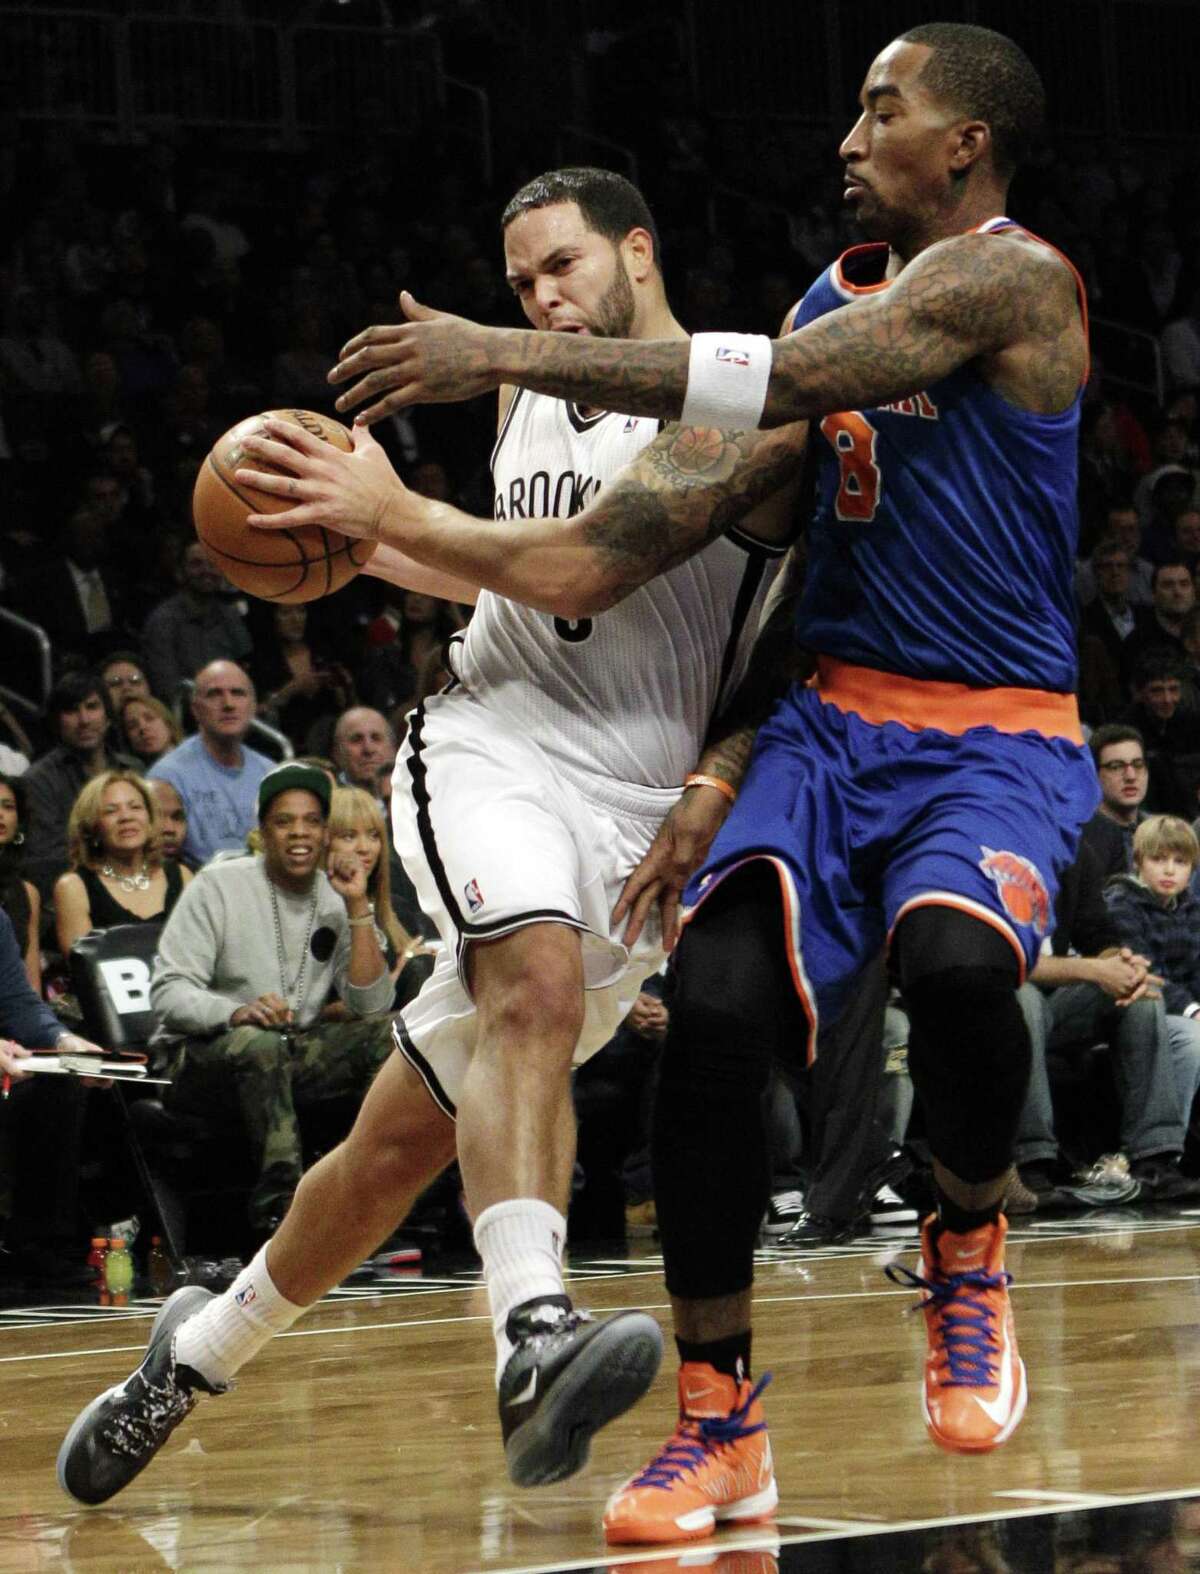 Brooklyn Nets guard Deron Williams attempts to drive around New York Knicks guard J.R. Smith. By The Associated Press